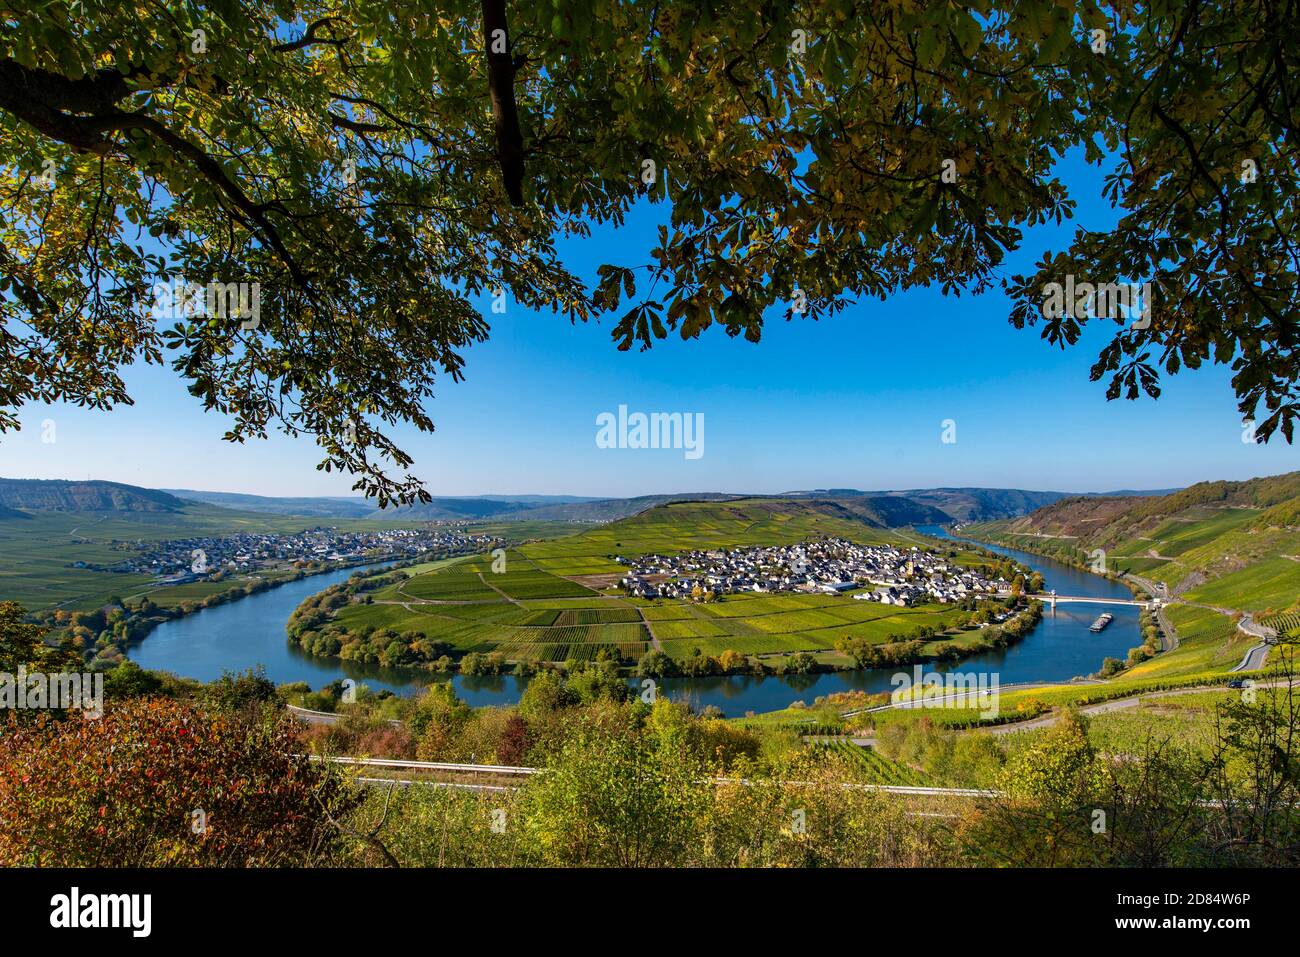 GERMANY, Mosel River, he view from Zumethof across the river bend  towards Trittenheim is one of the most spectacular sights along the river Moselle Stock Photo